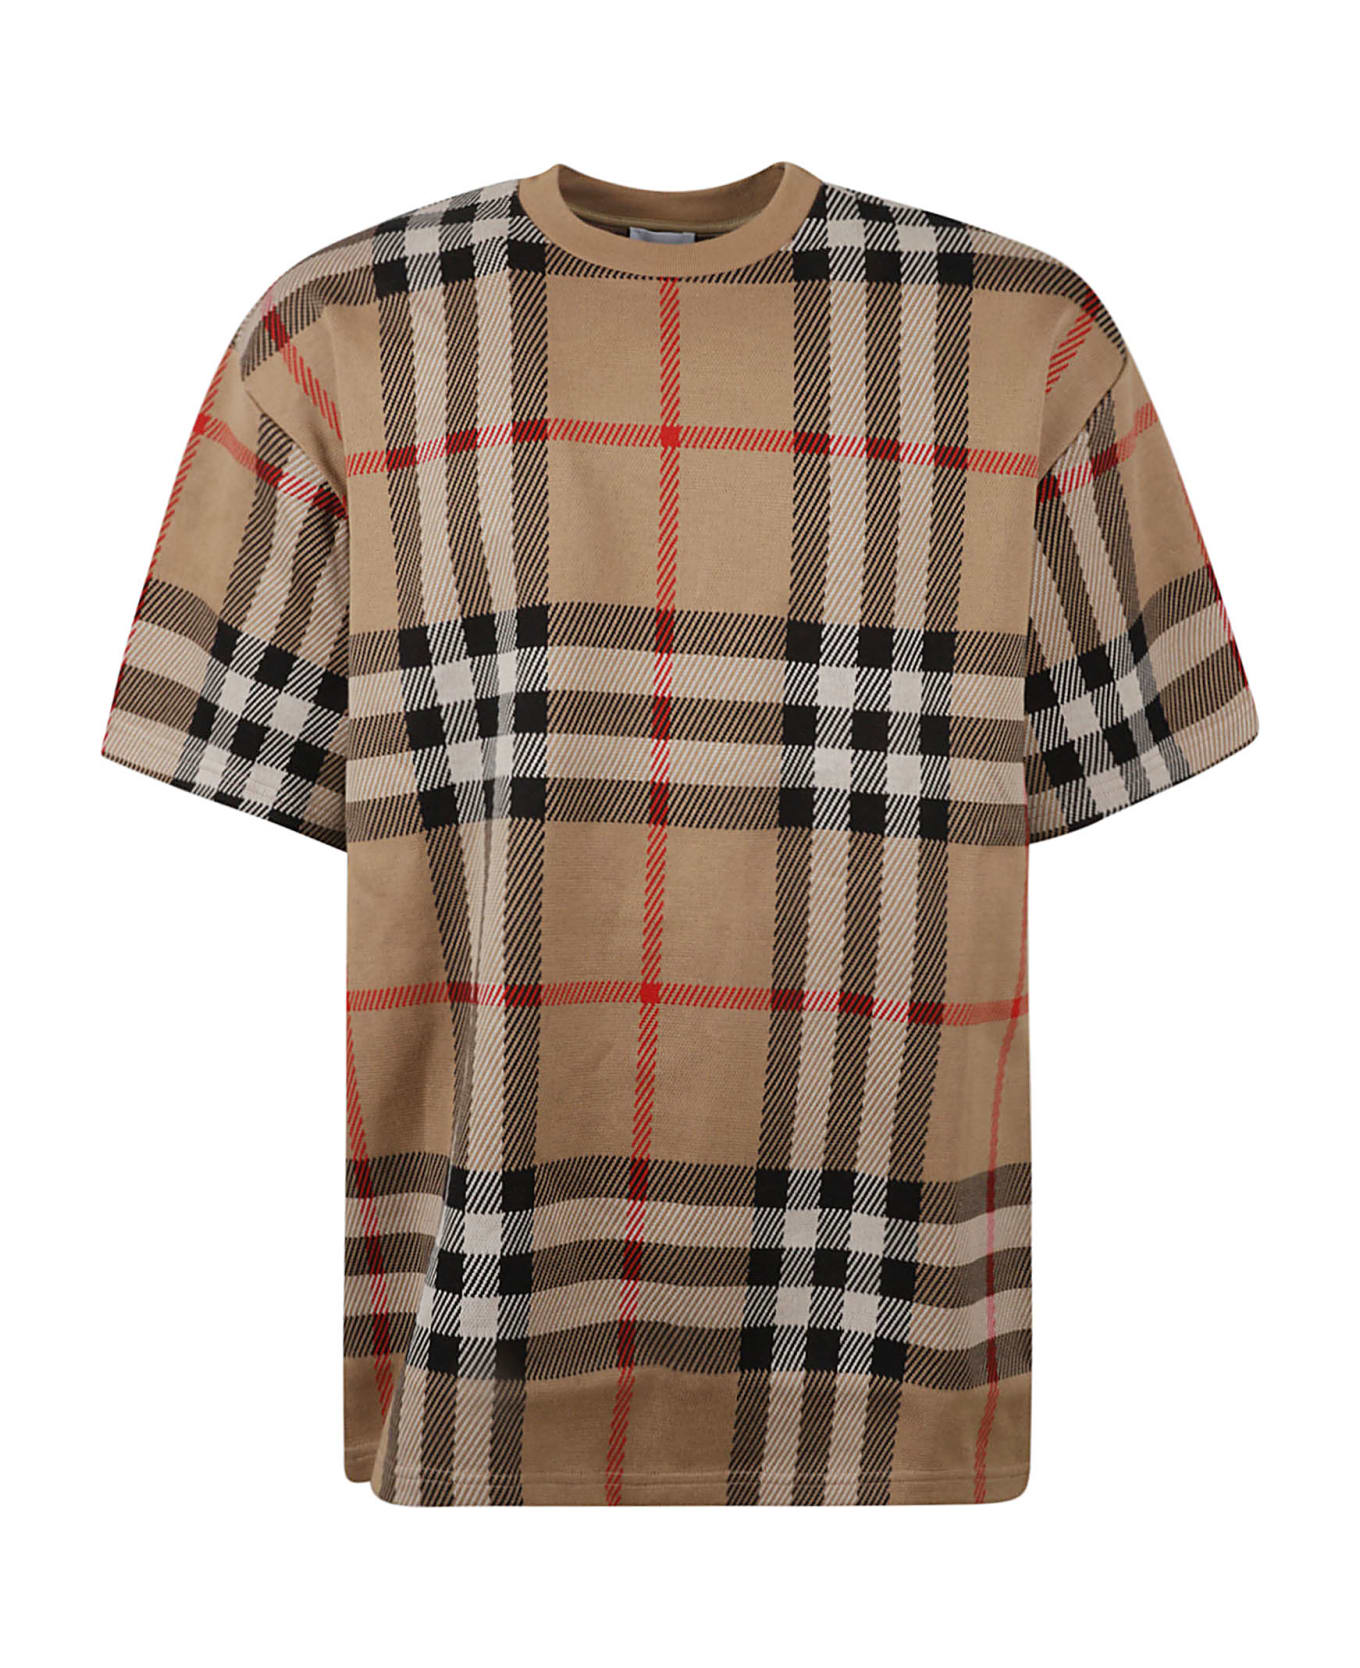 Burberry Ferry T-shirt - Archive Beige Ip Chk シャツ